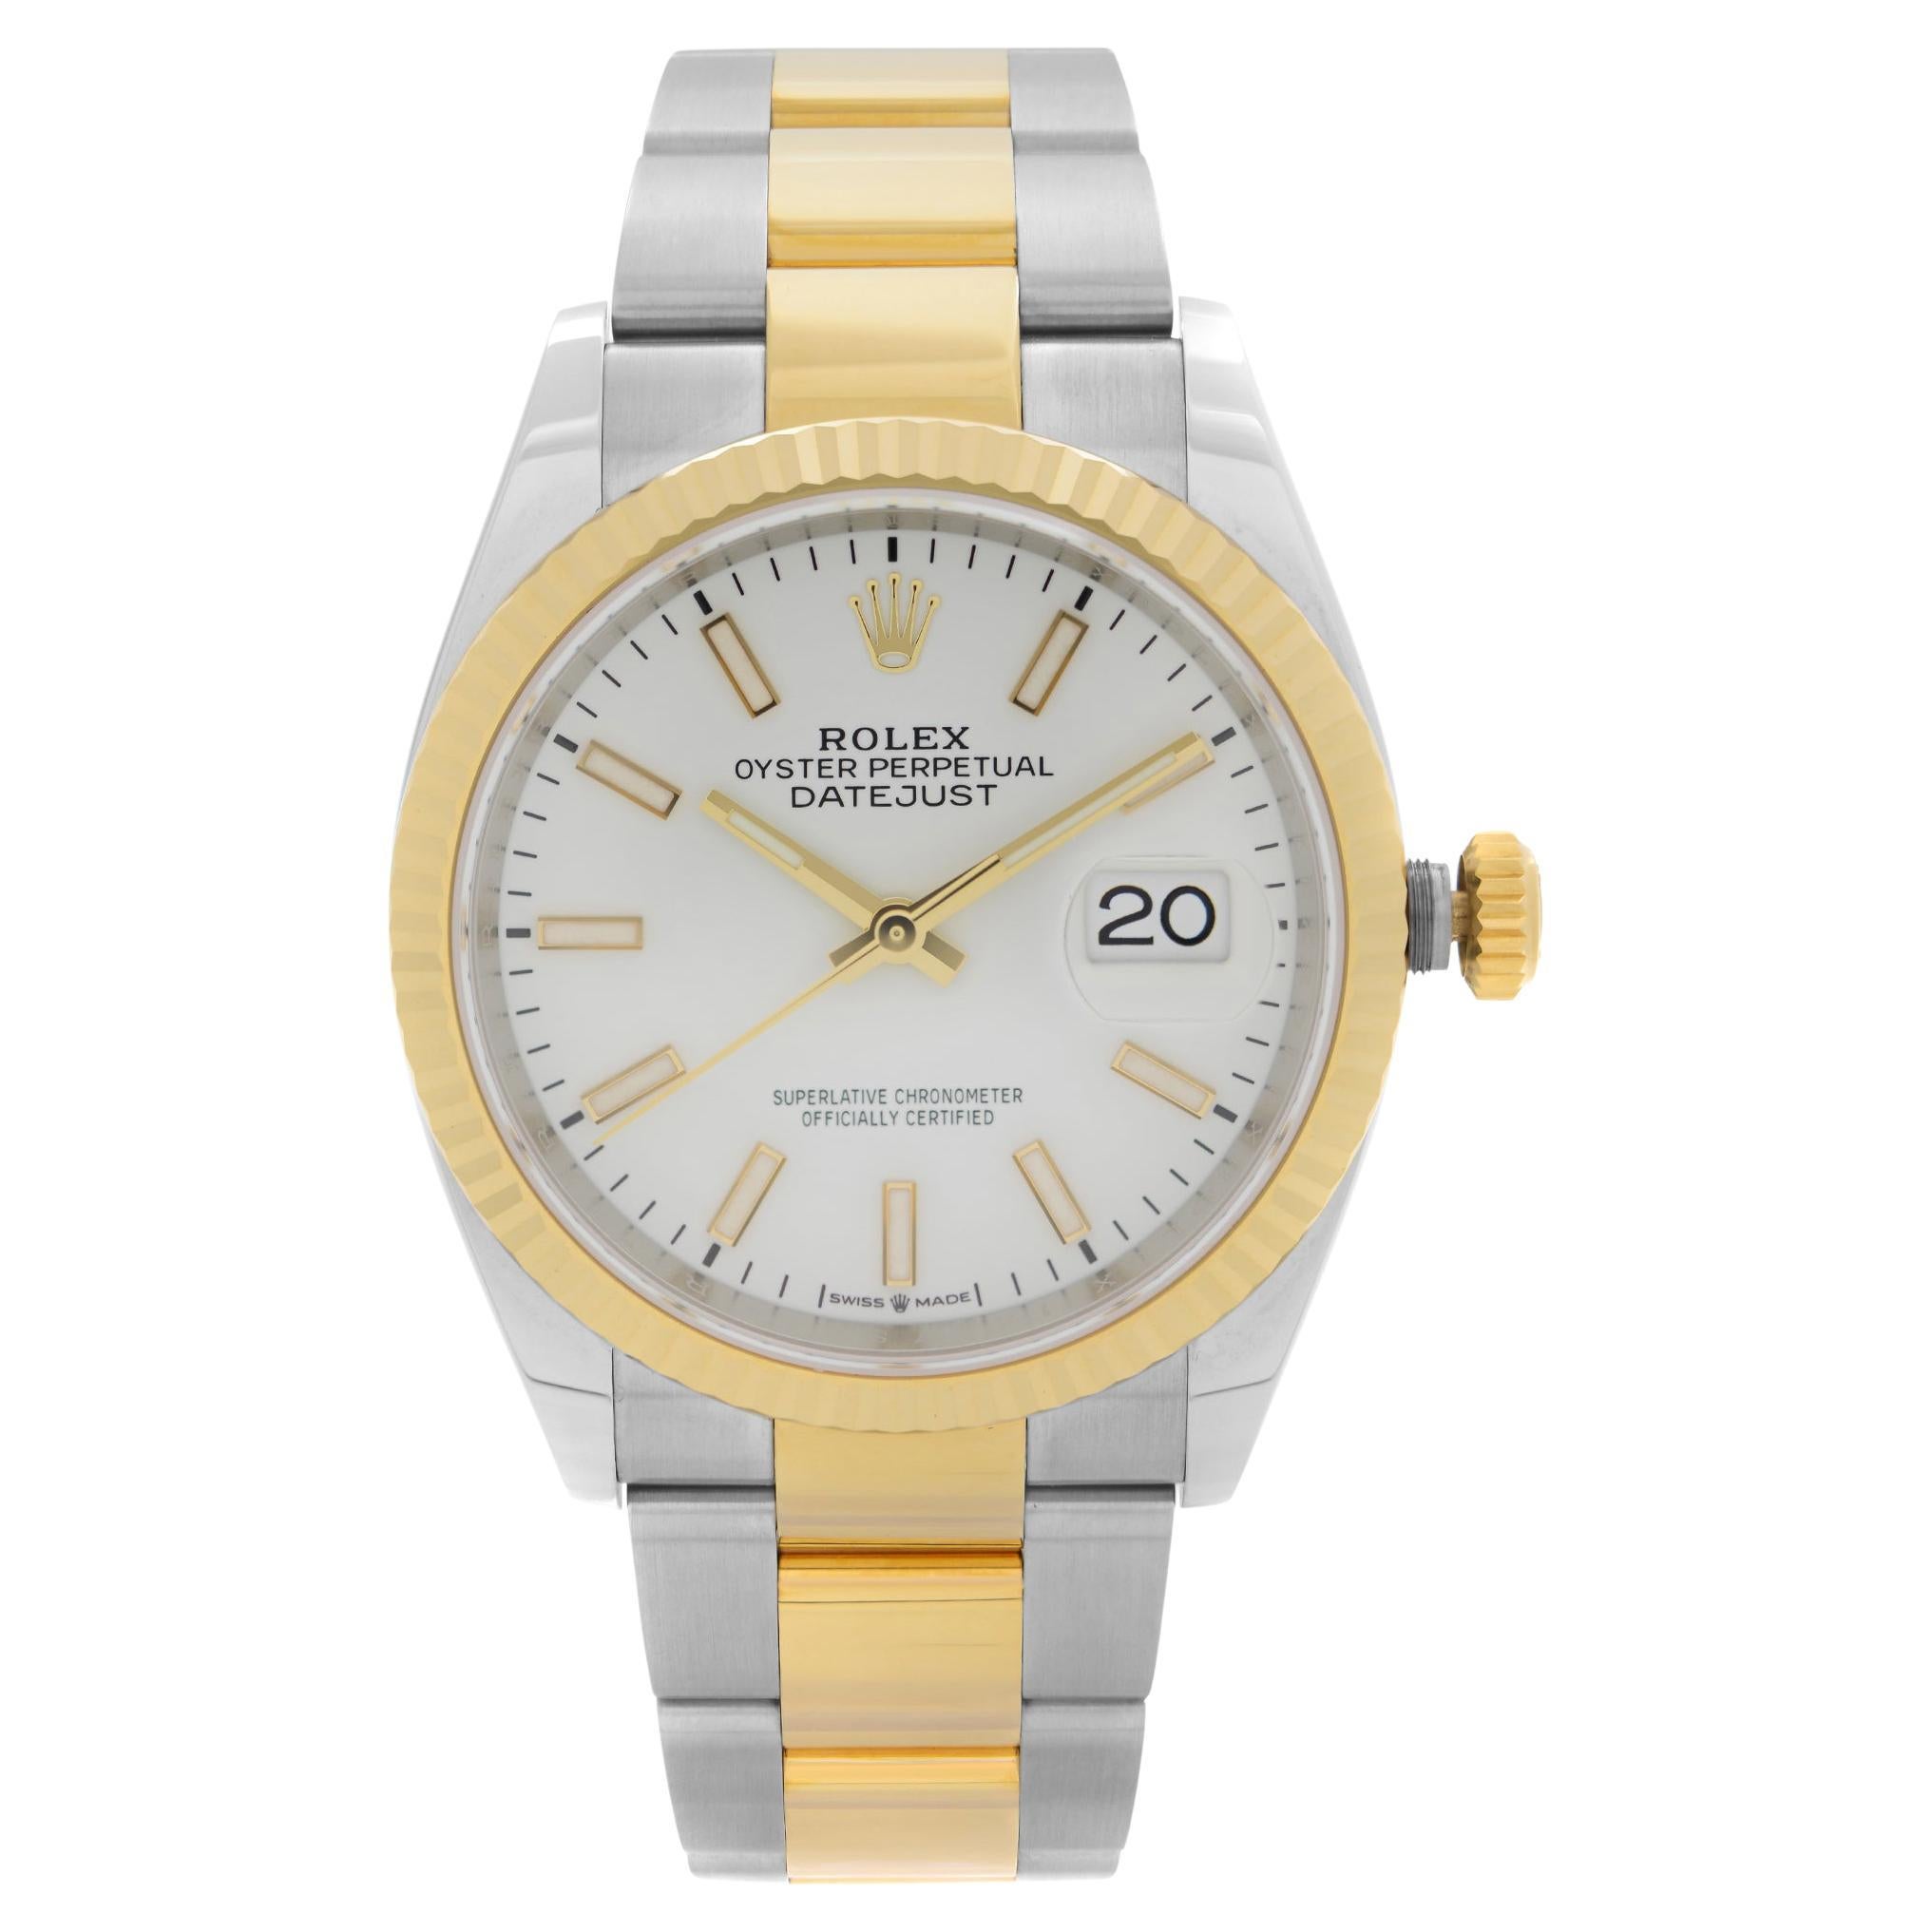 Rolex Datejust Stainless Steel 18k Yellow Gold White Dial Mens Watch 126233